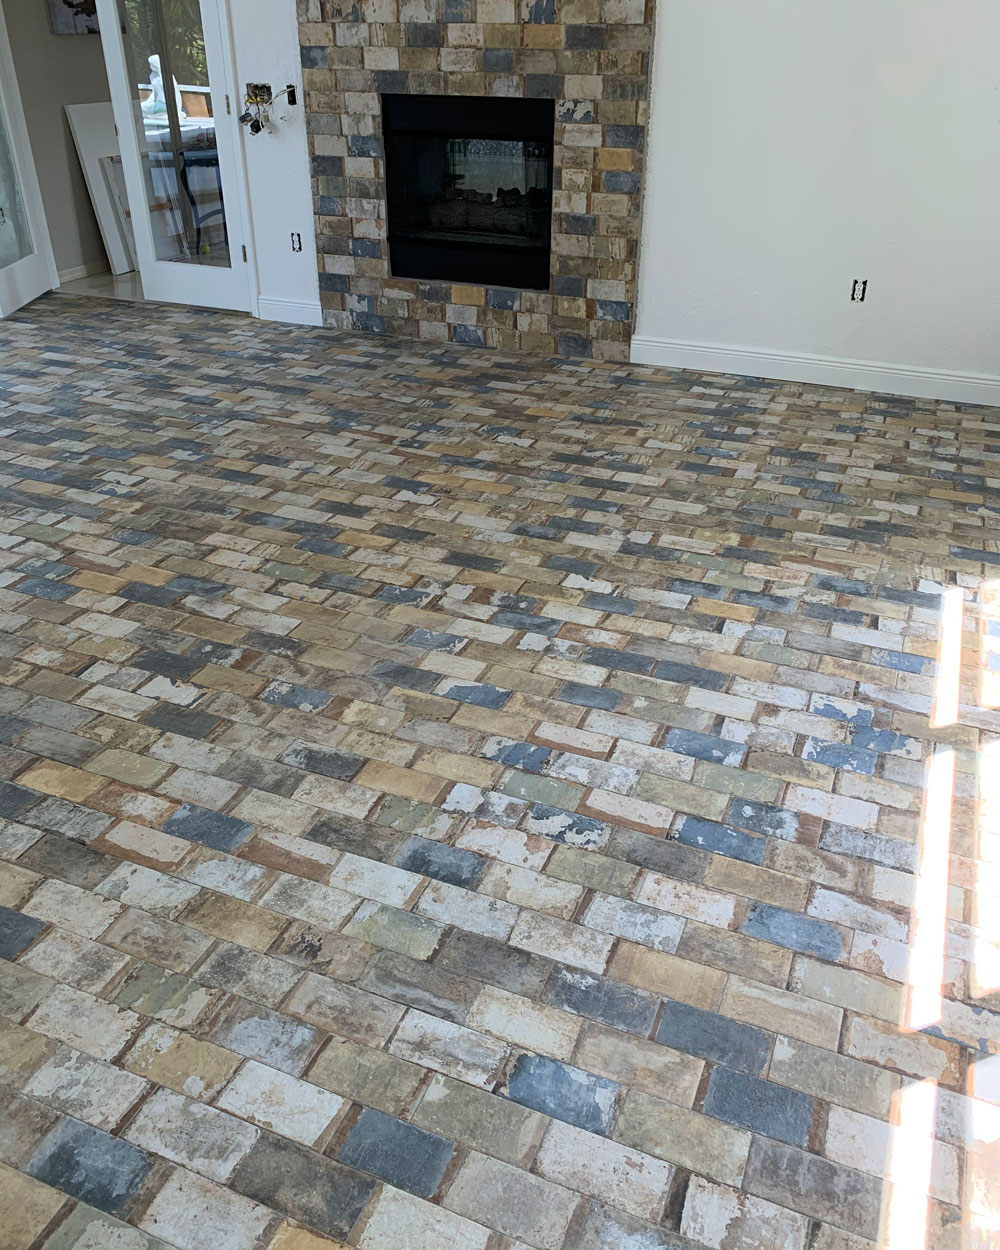 Patio with tile floors with brick pattern